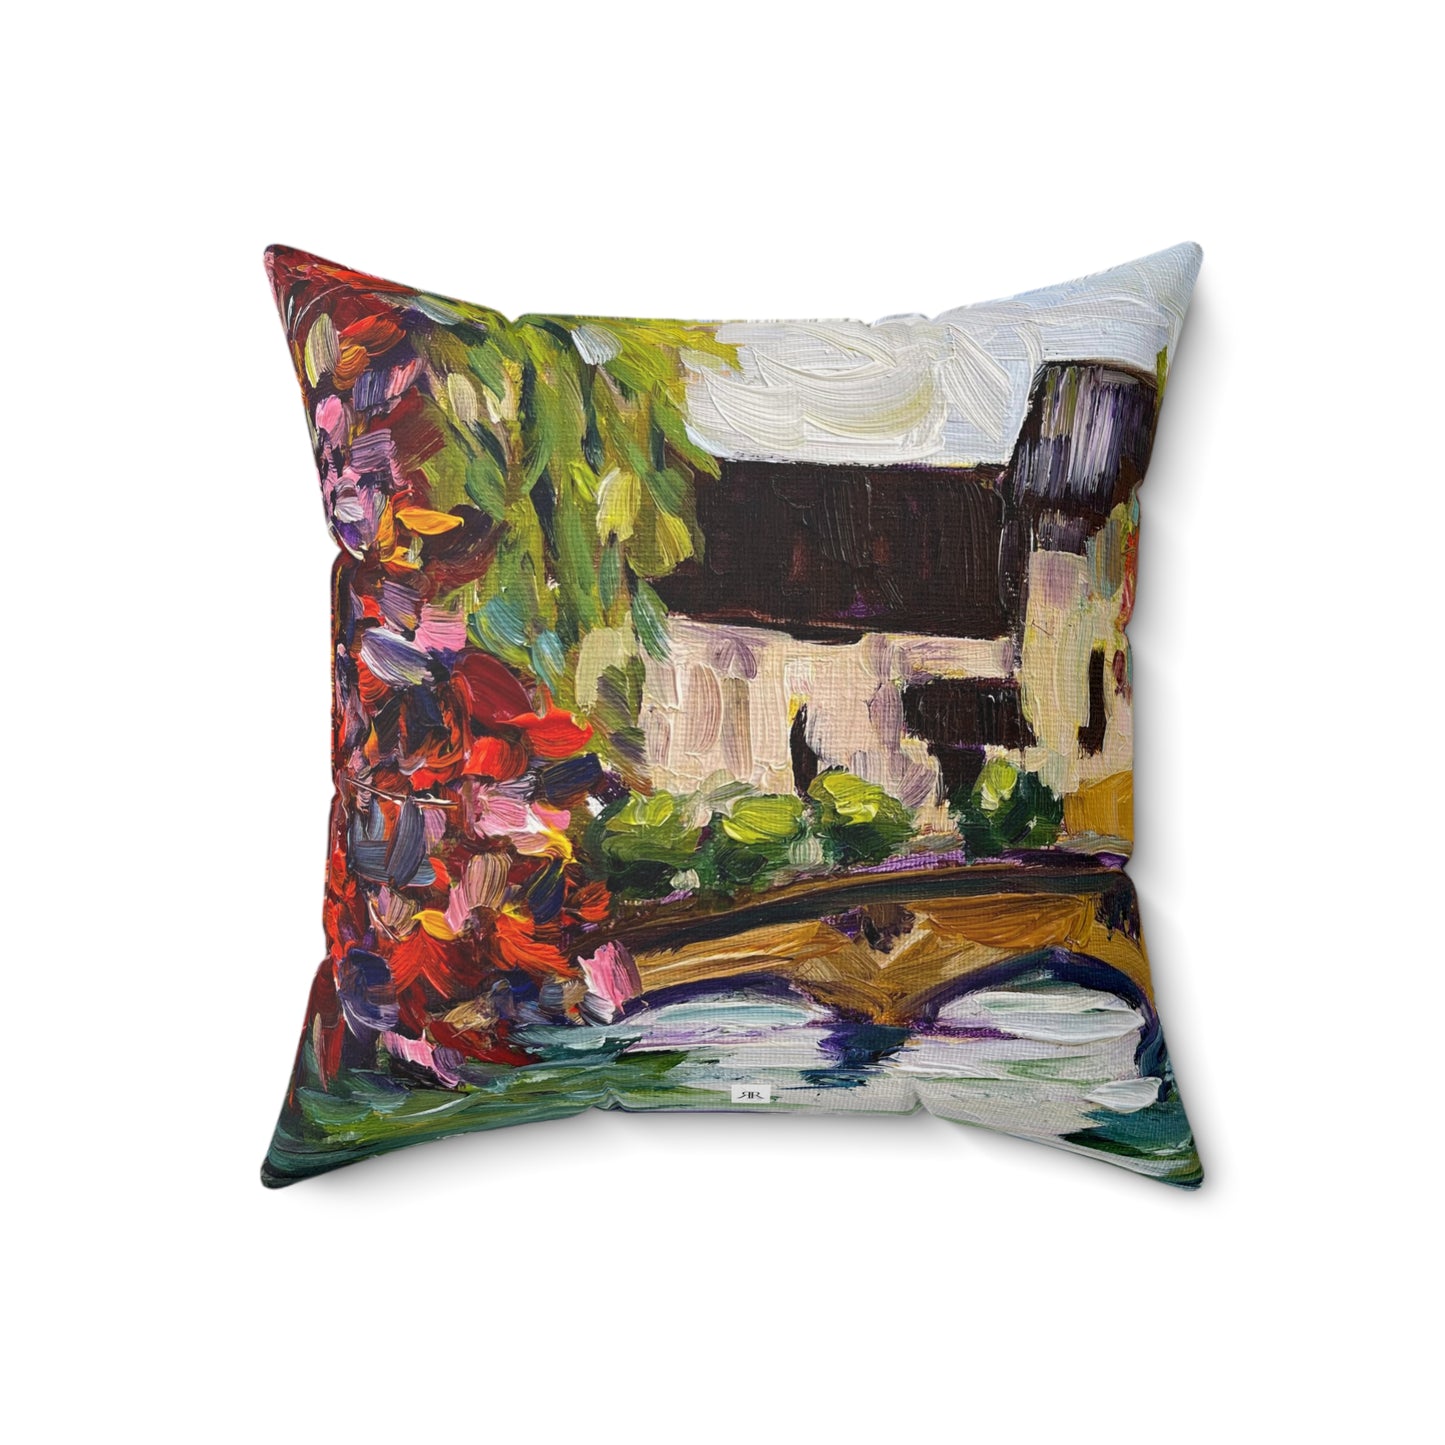 Autumn in Bourton on the Water Cotswolds  Indoor Spun Polyester Square Pillow